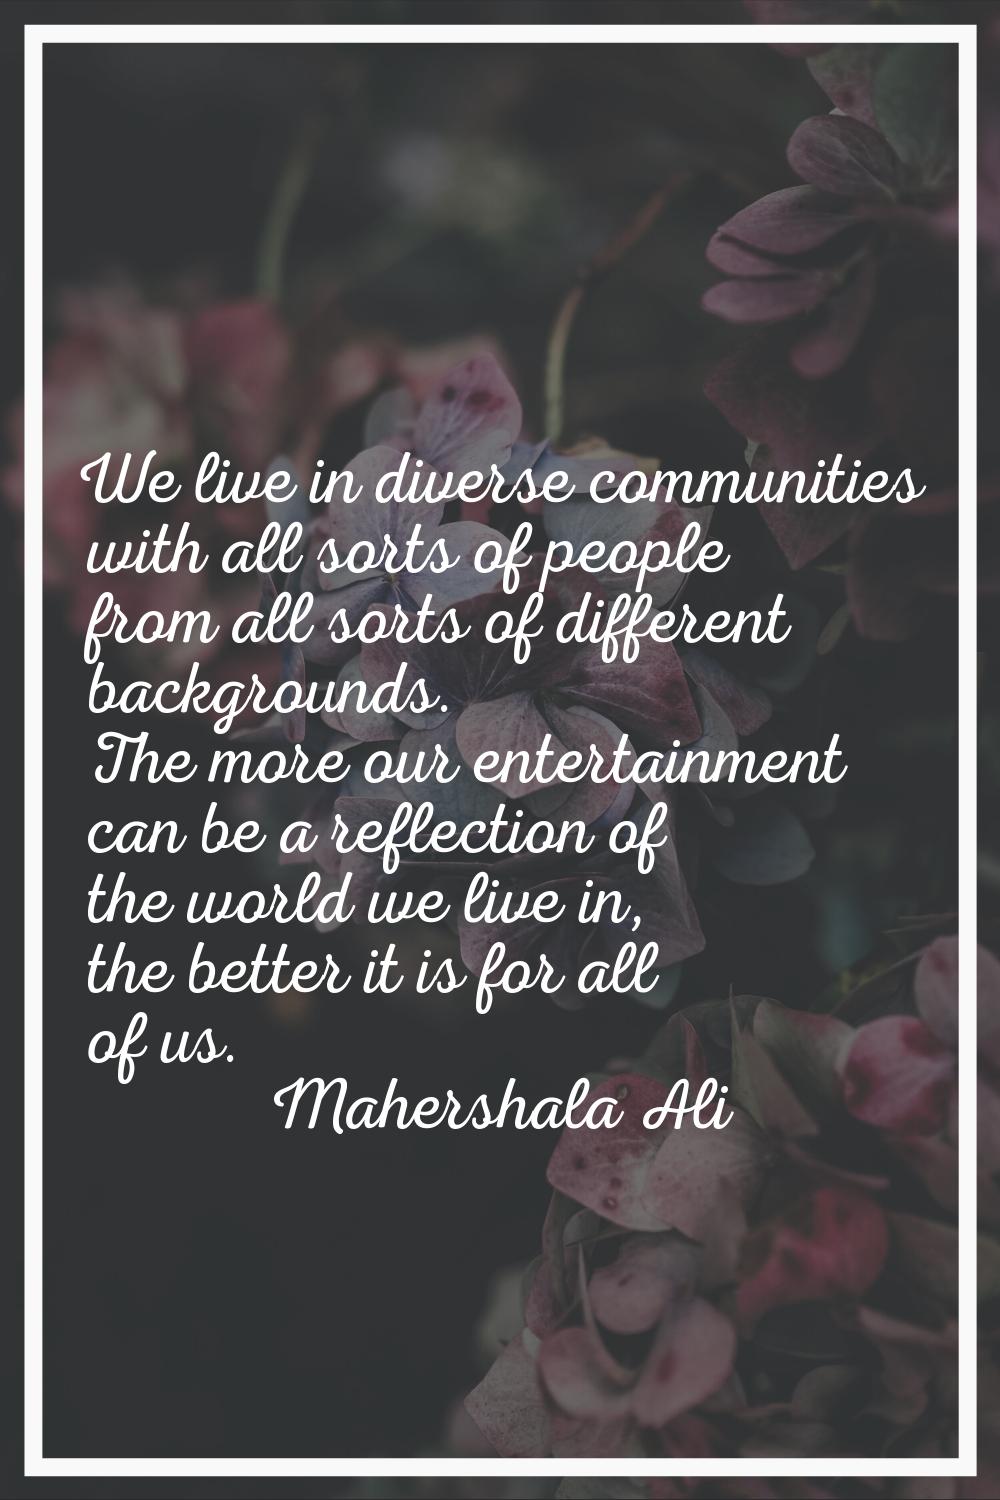 We live in diverse communities with all sorts of people from all sorts of different backgrounds. Th